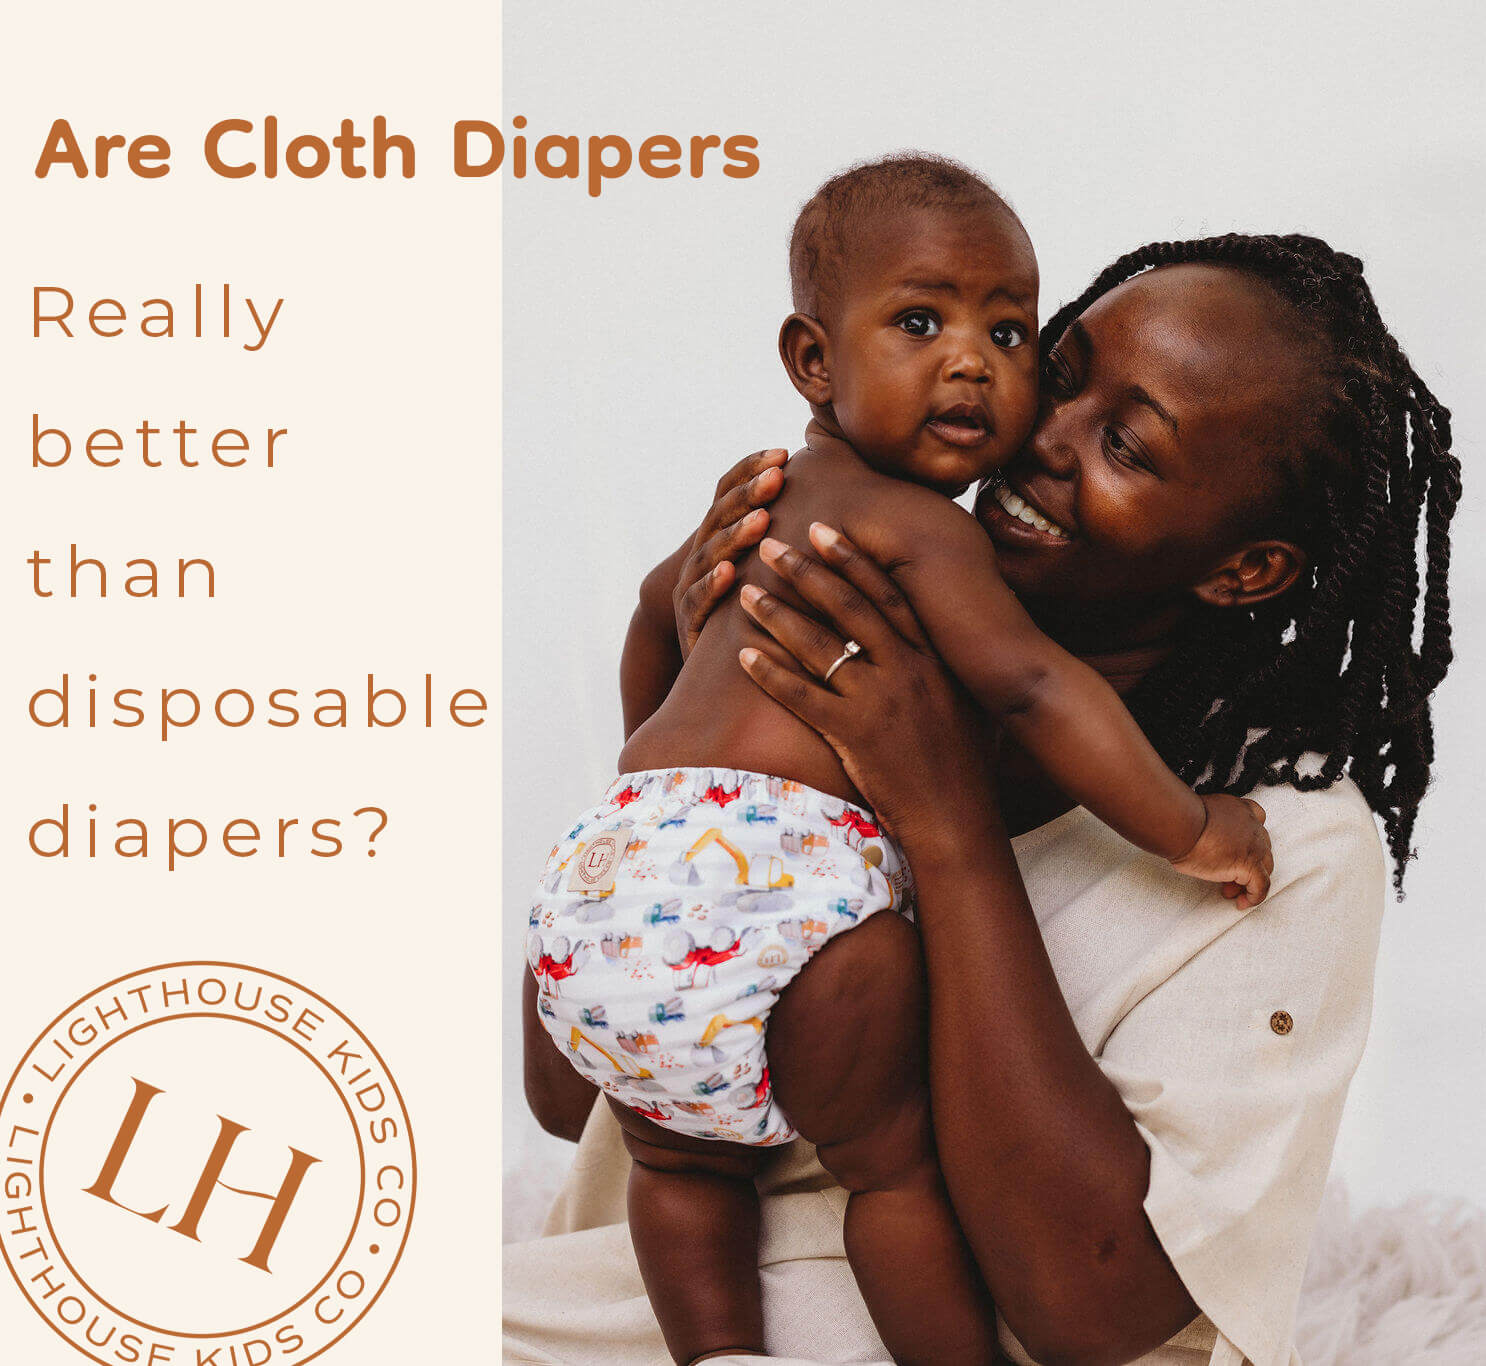 Are_cloth_diapers_really_better_than_disposable_diapers?